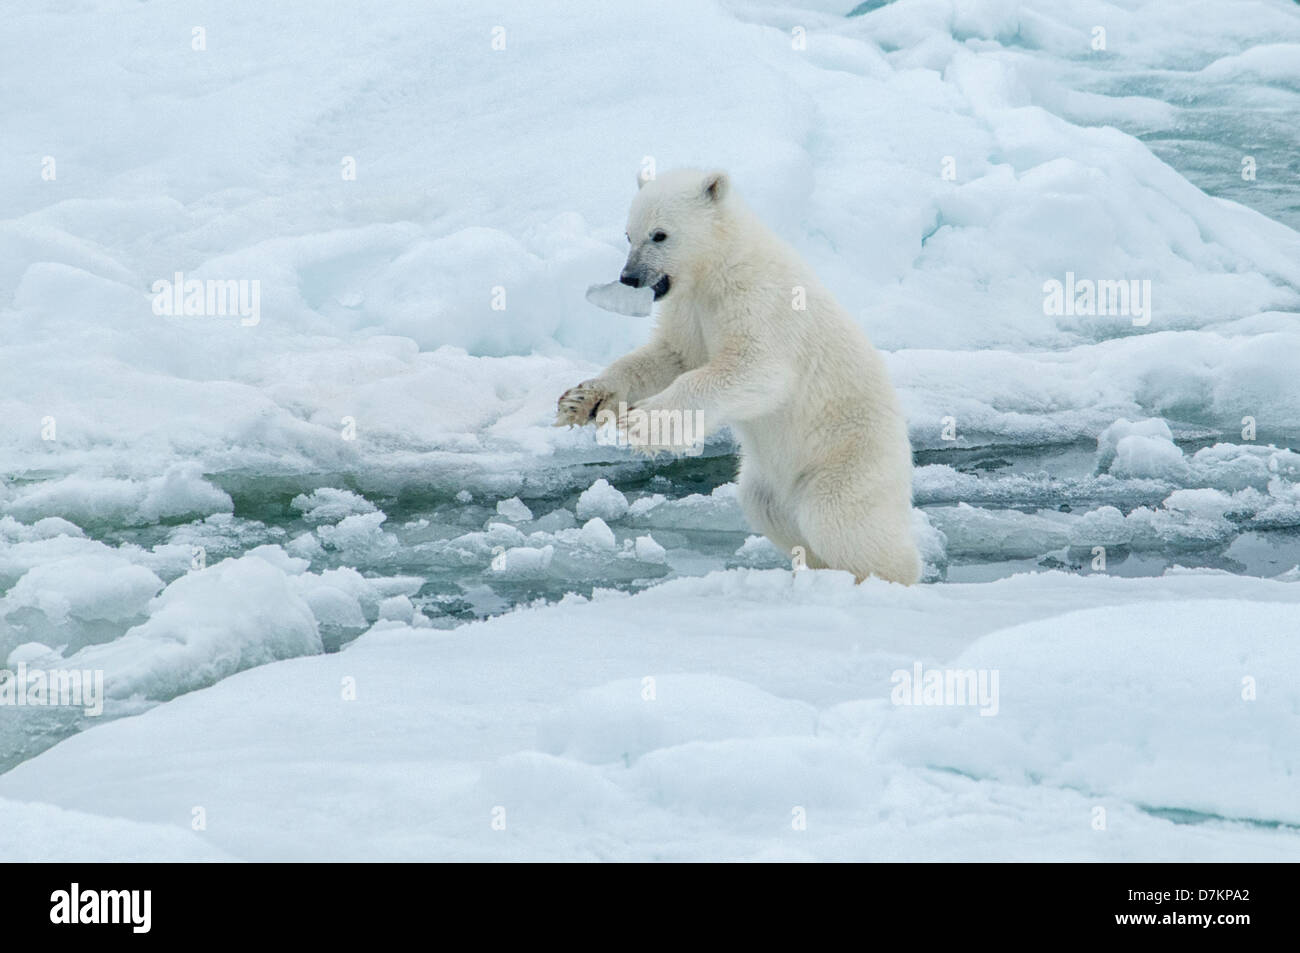 Cute Polar Bear Cub, Ursus maritimus, playing with ice in his mouth on the Olgastretet Pack Ice, Svalbard Archipelago, Norway Stock Photo